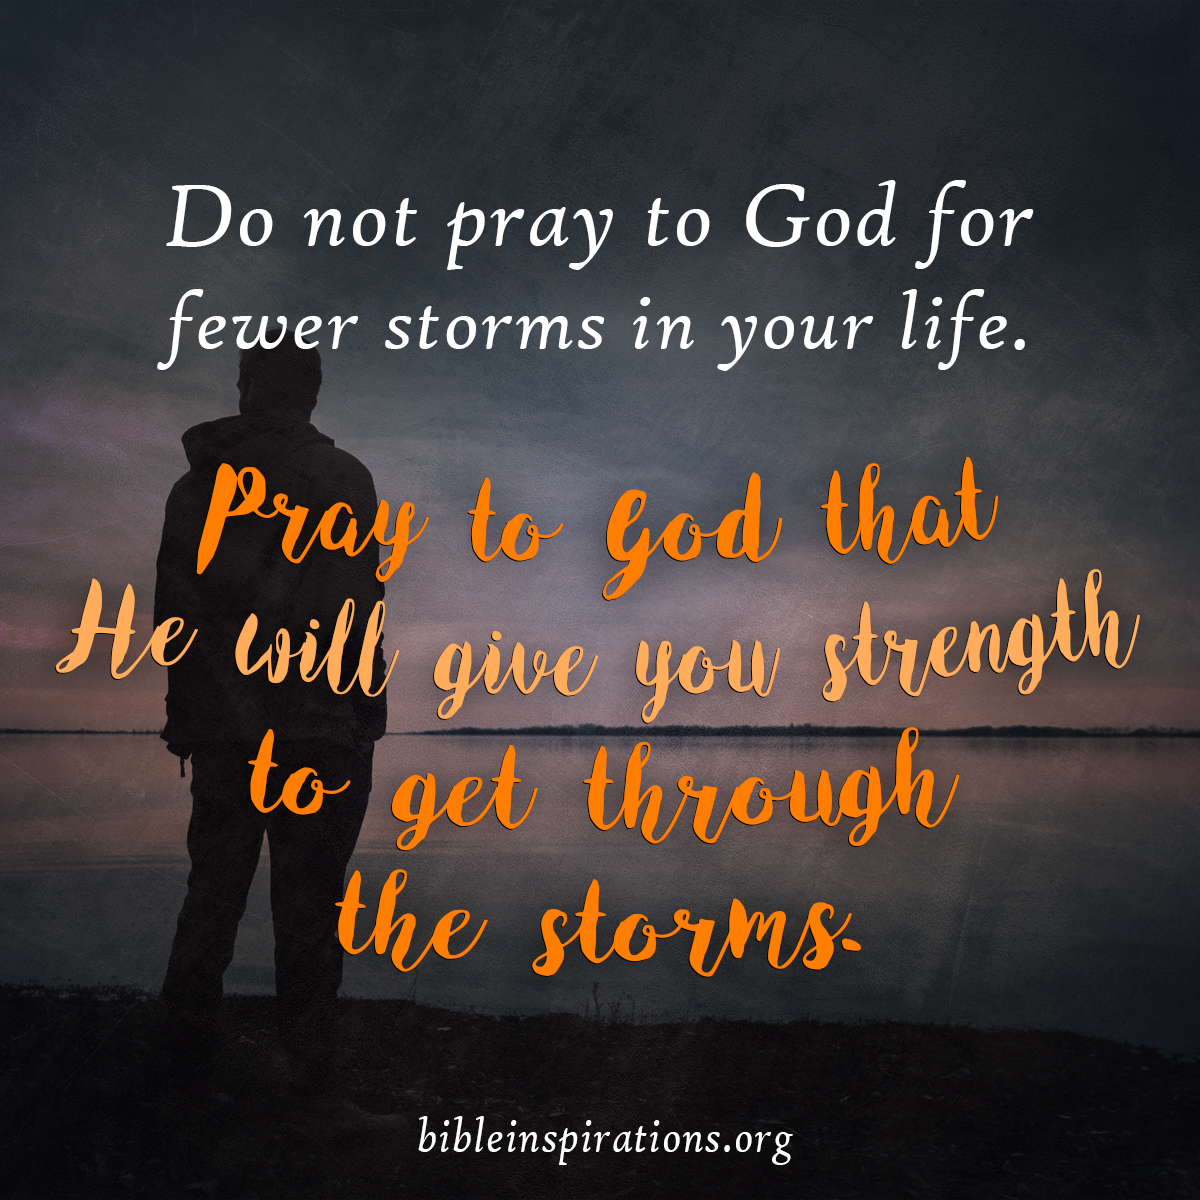 Do not pray to God for fewer storms in your life. Pray to God that He will give you strength to get through the storms.